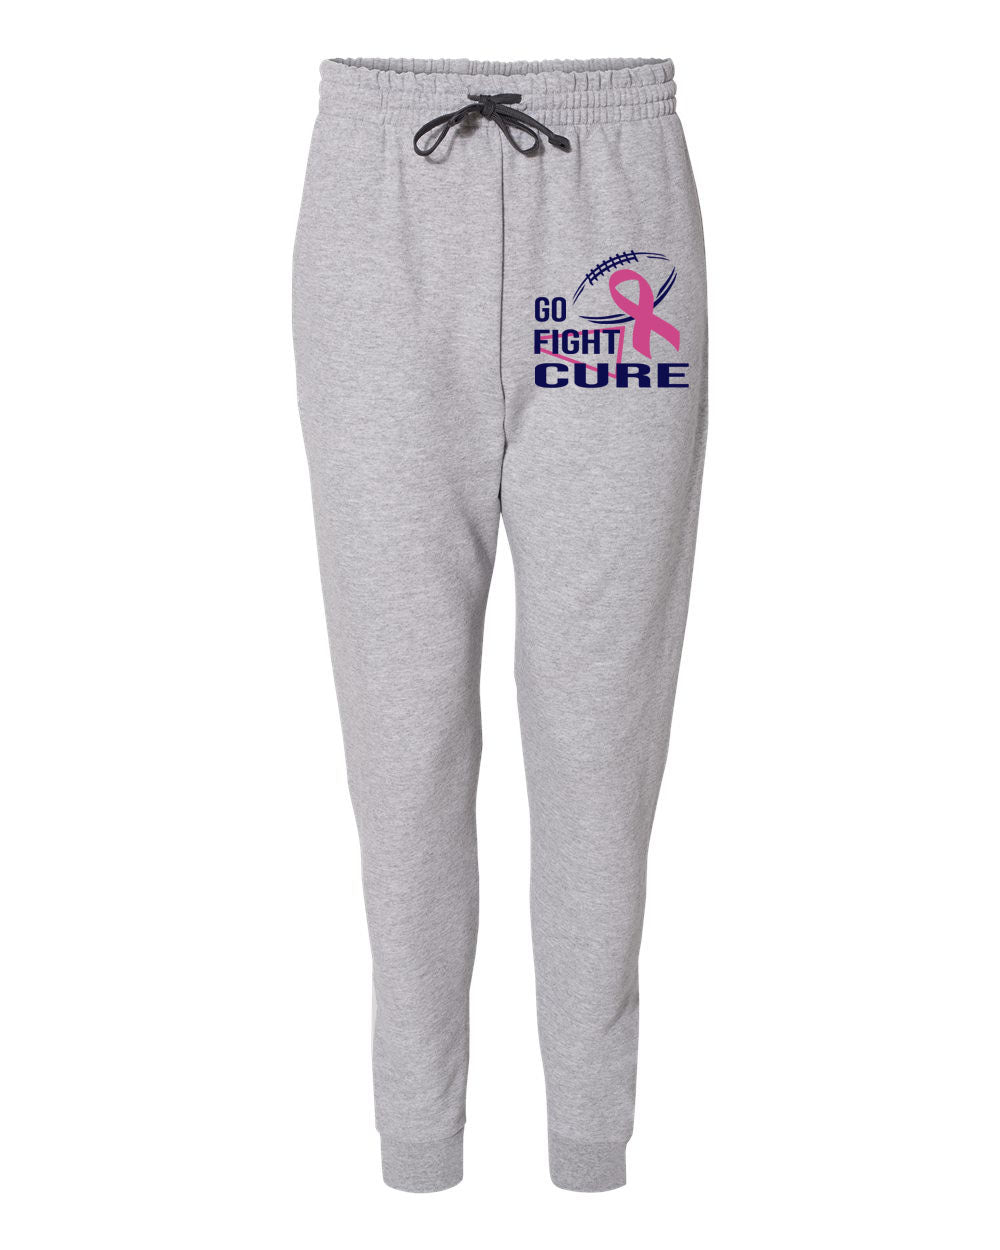 Go fight cure Cheer Sweatpants